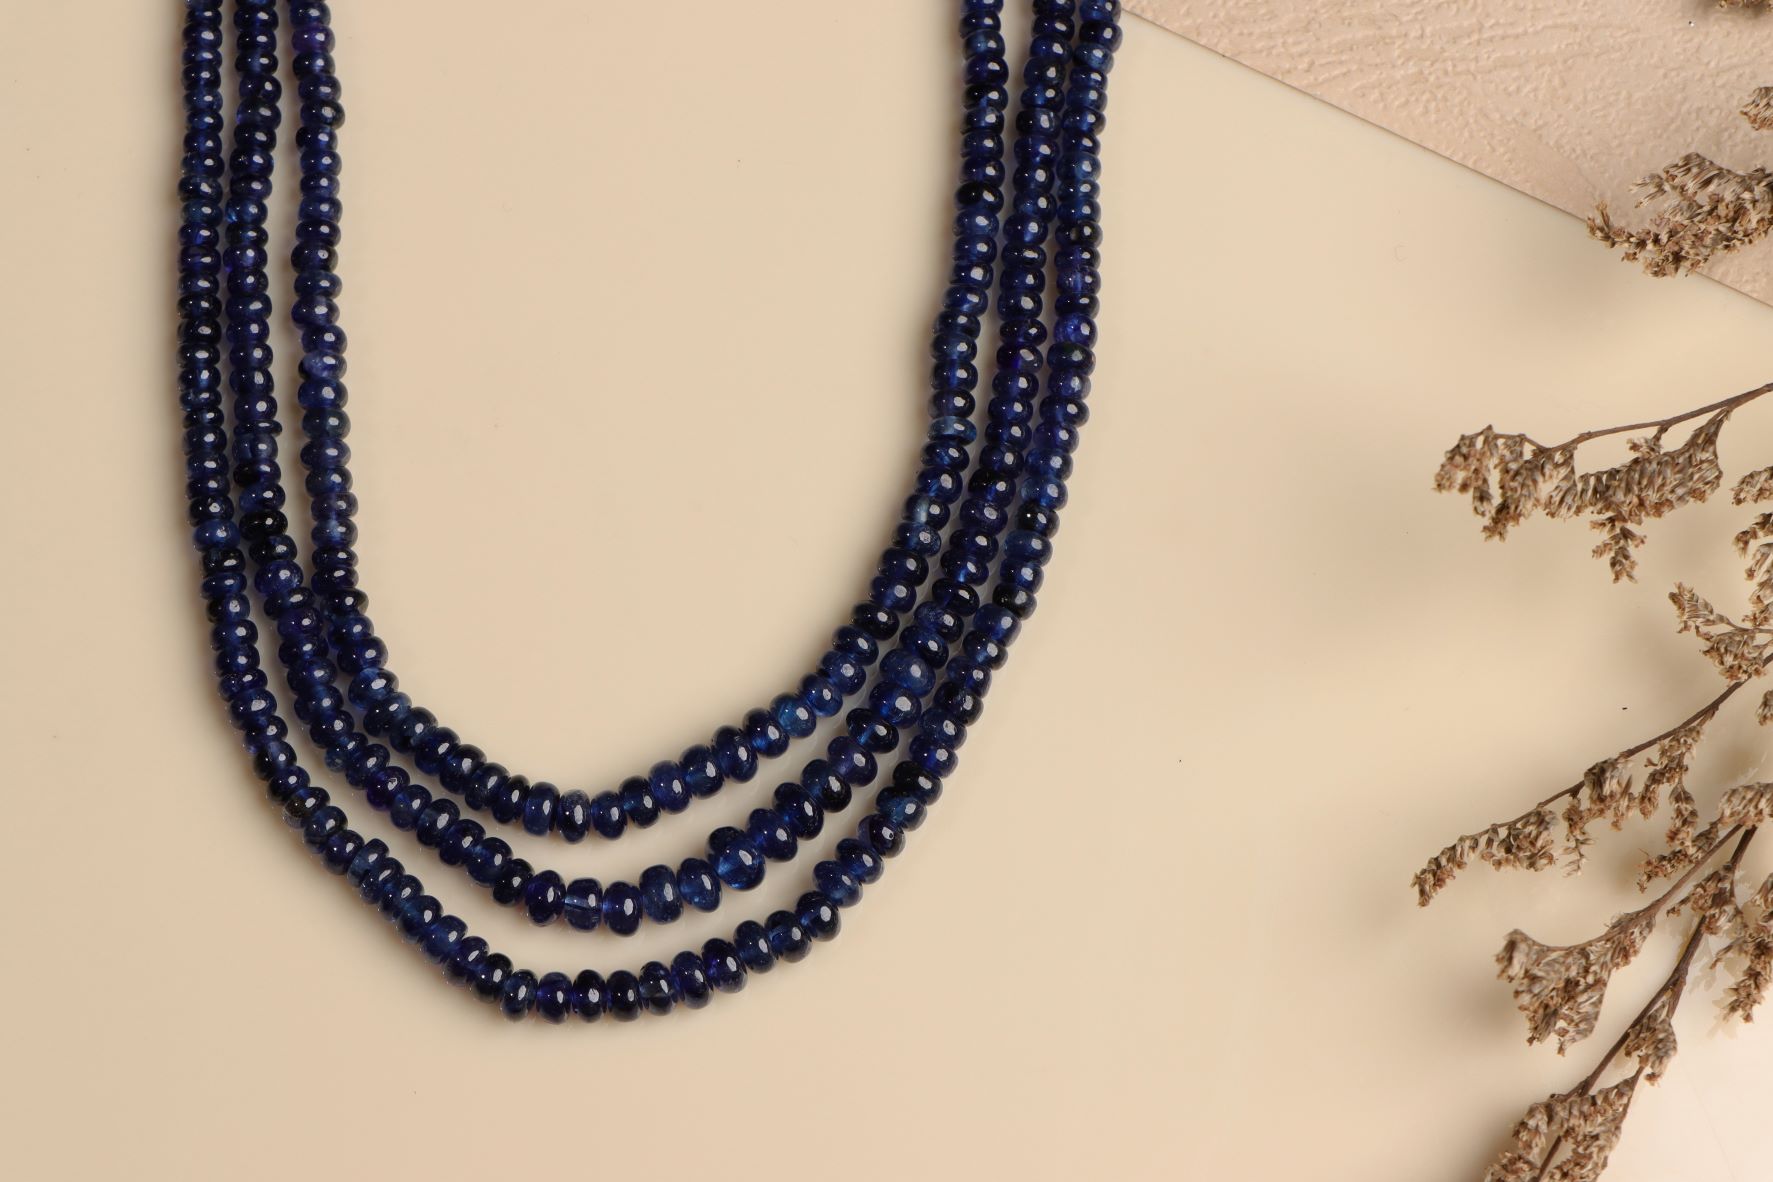 Periwinkle Blue Seed Bead Necklace, Thin 1.5mm Single Strand – Kathy  Bankston